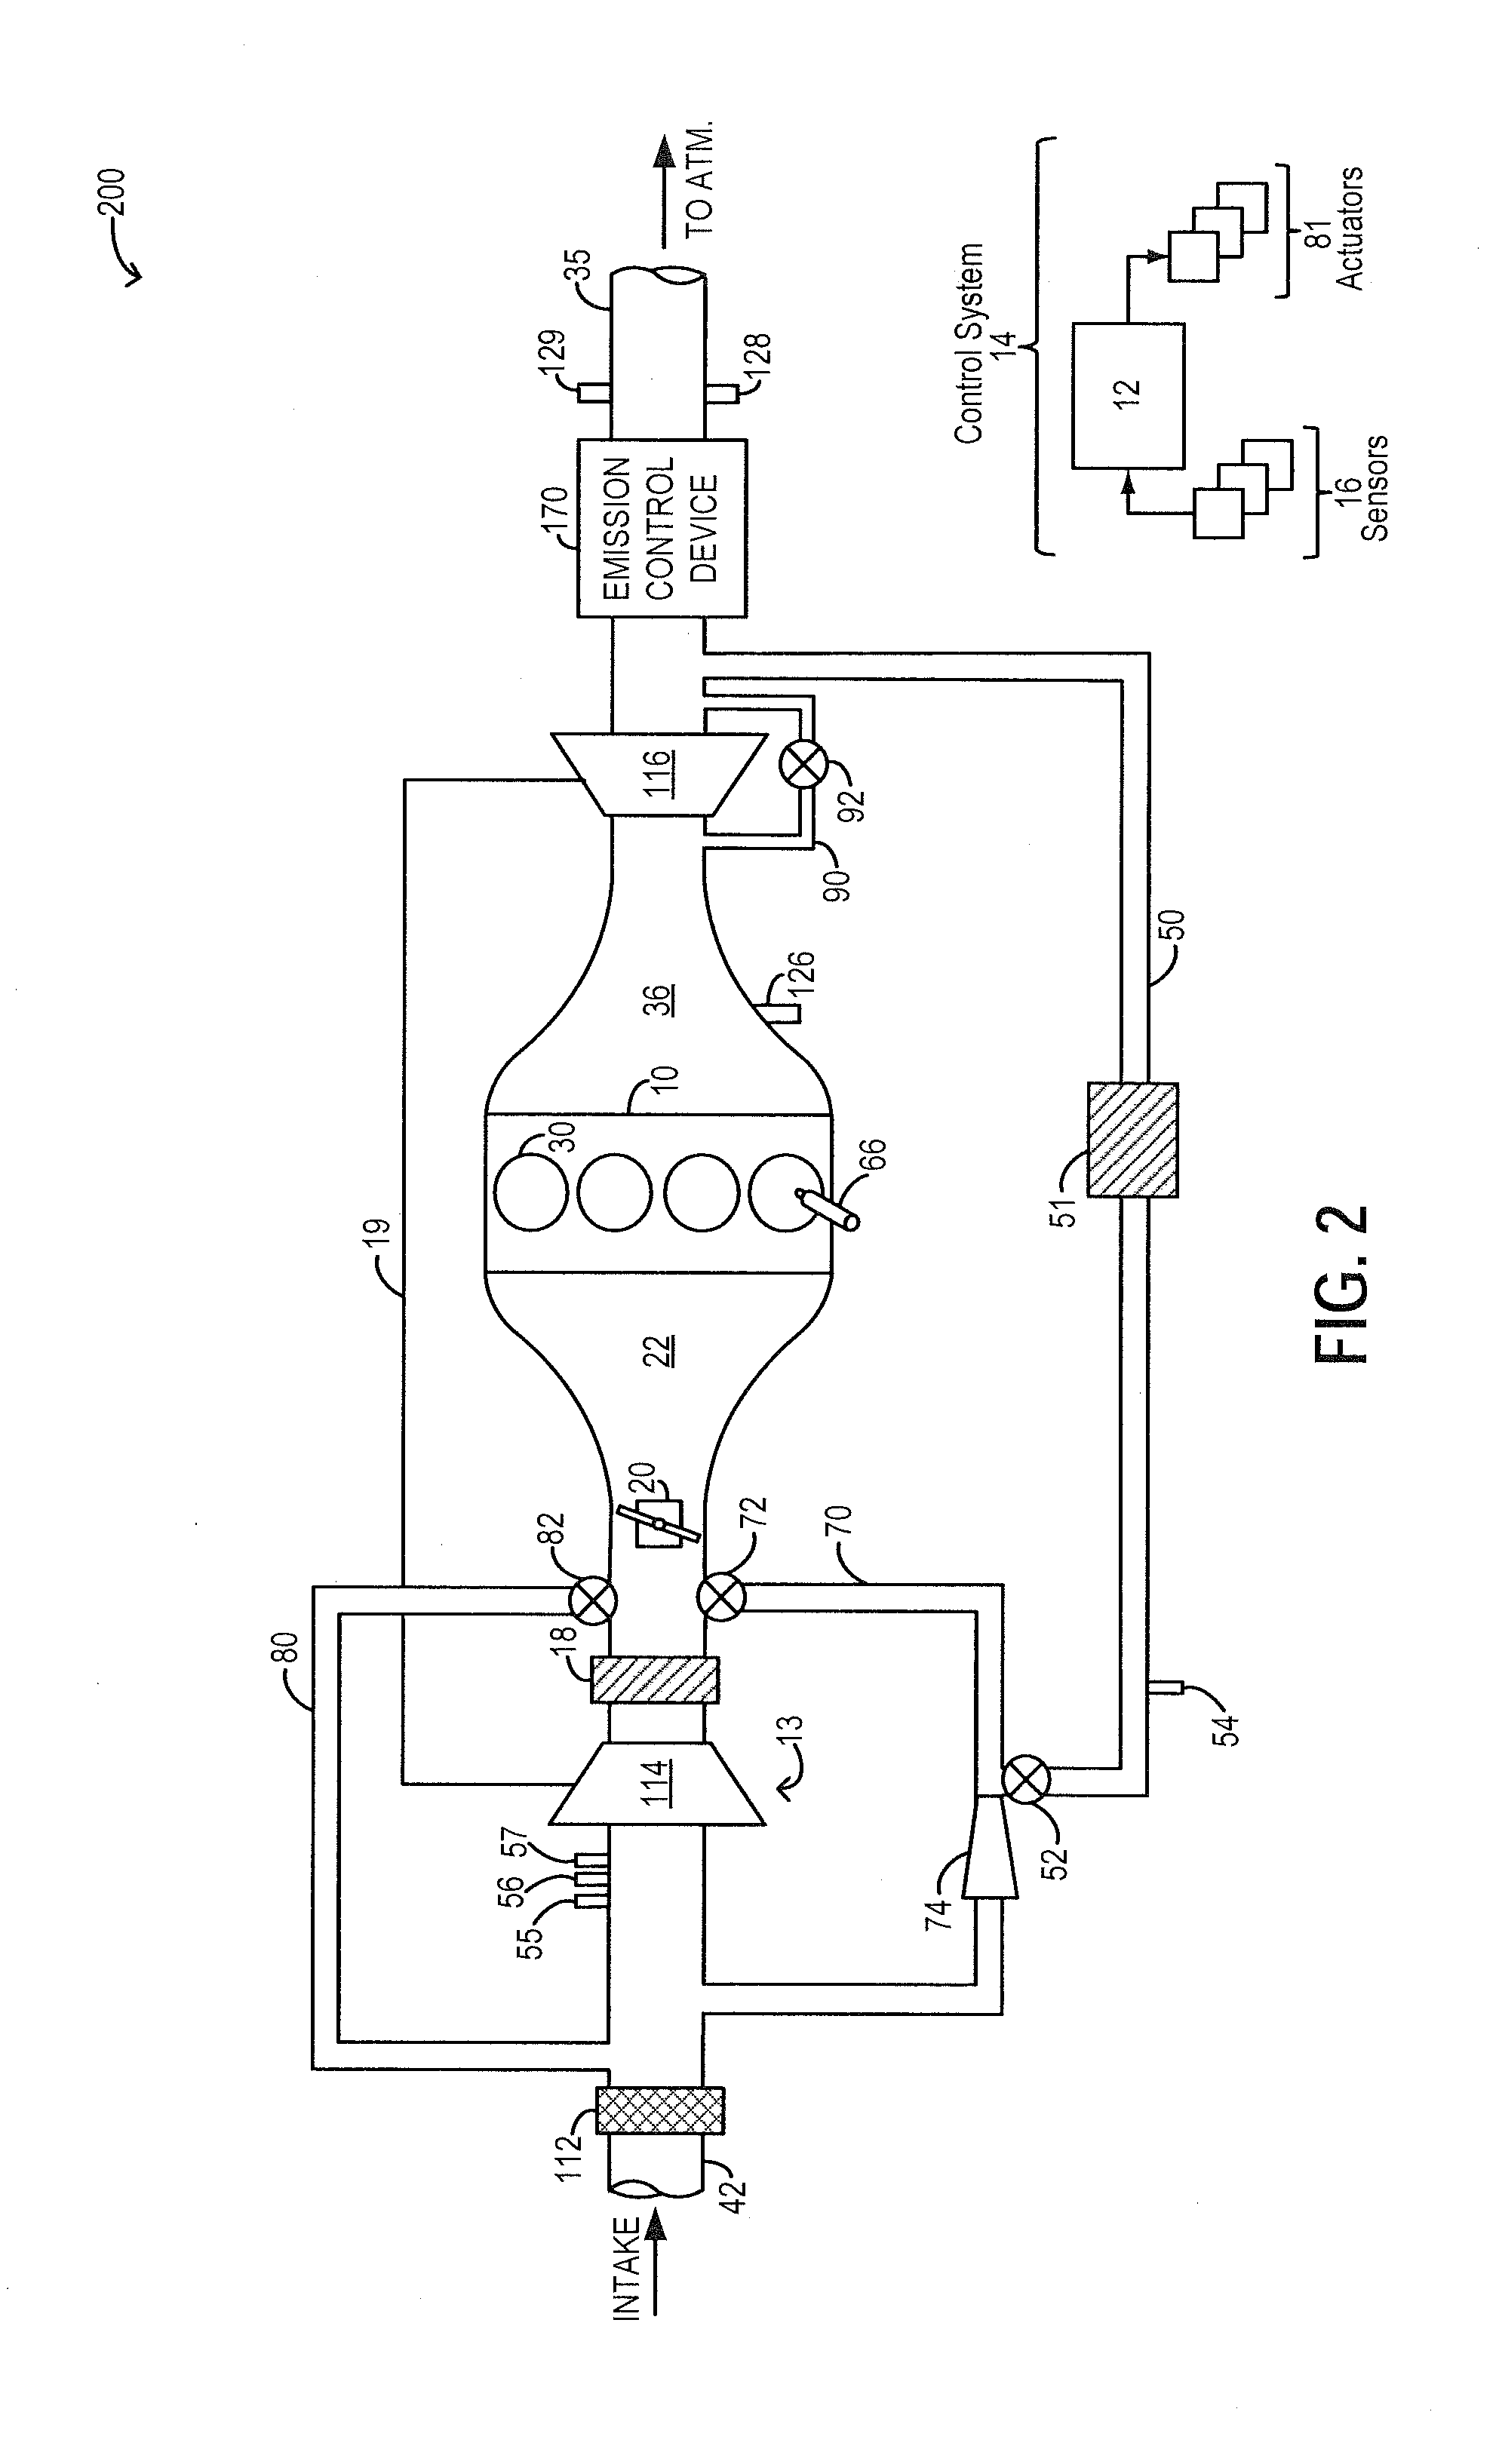 Methods and systems for egr control